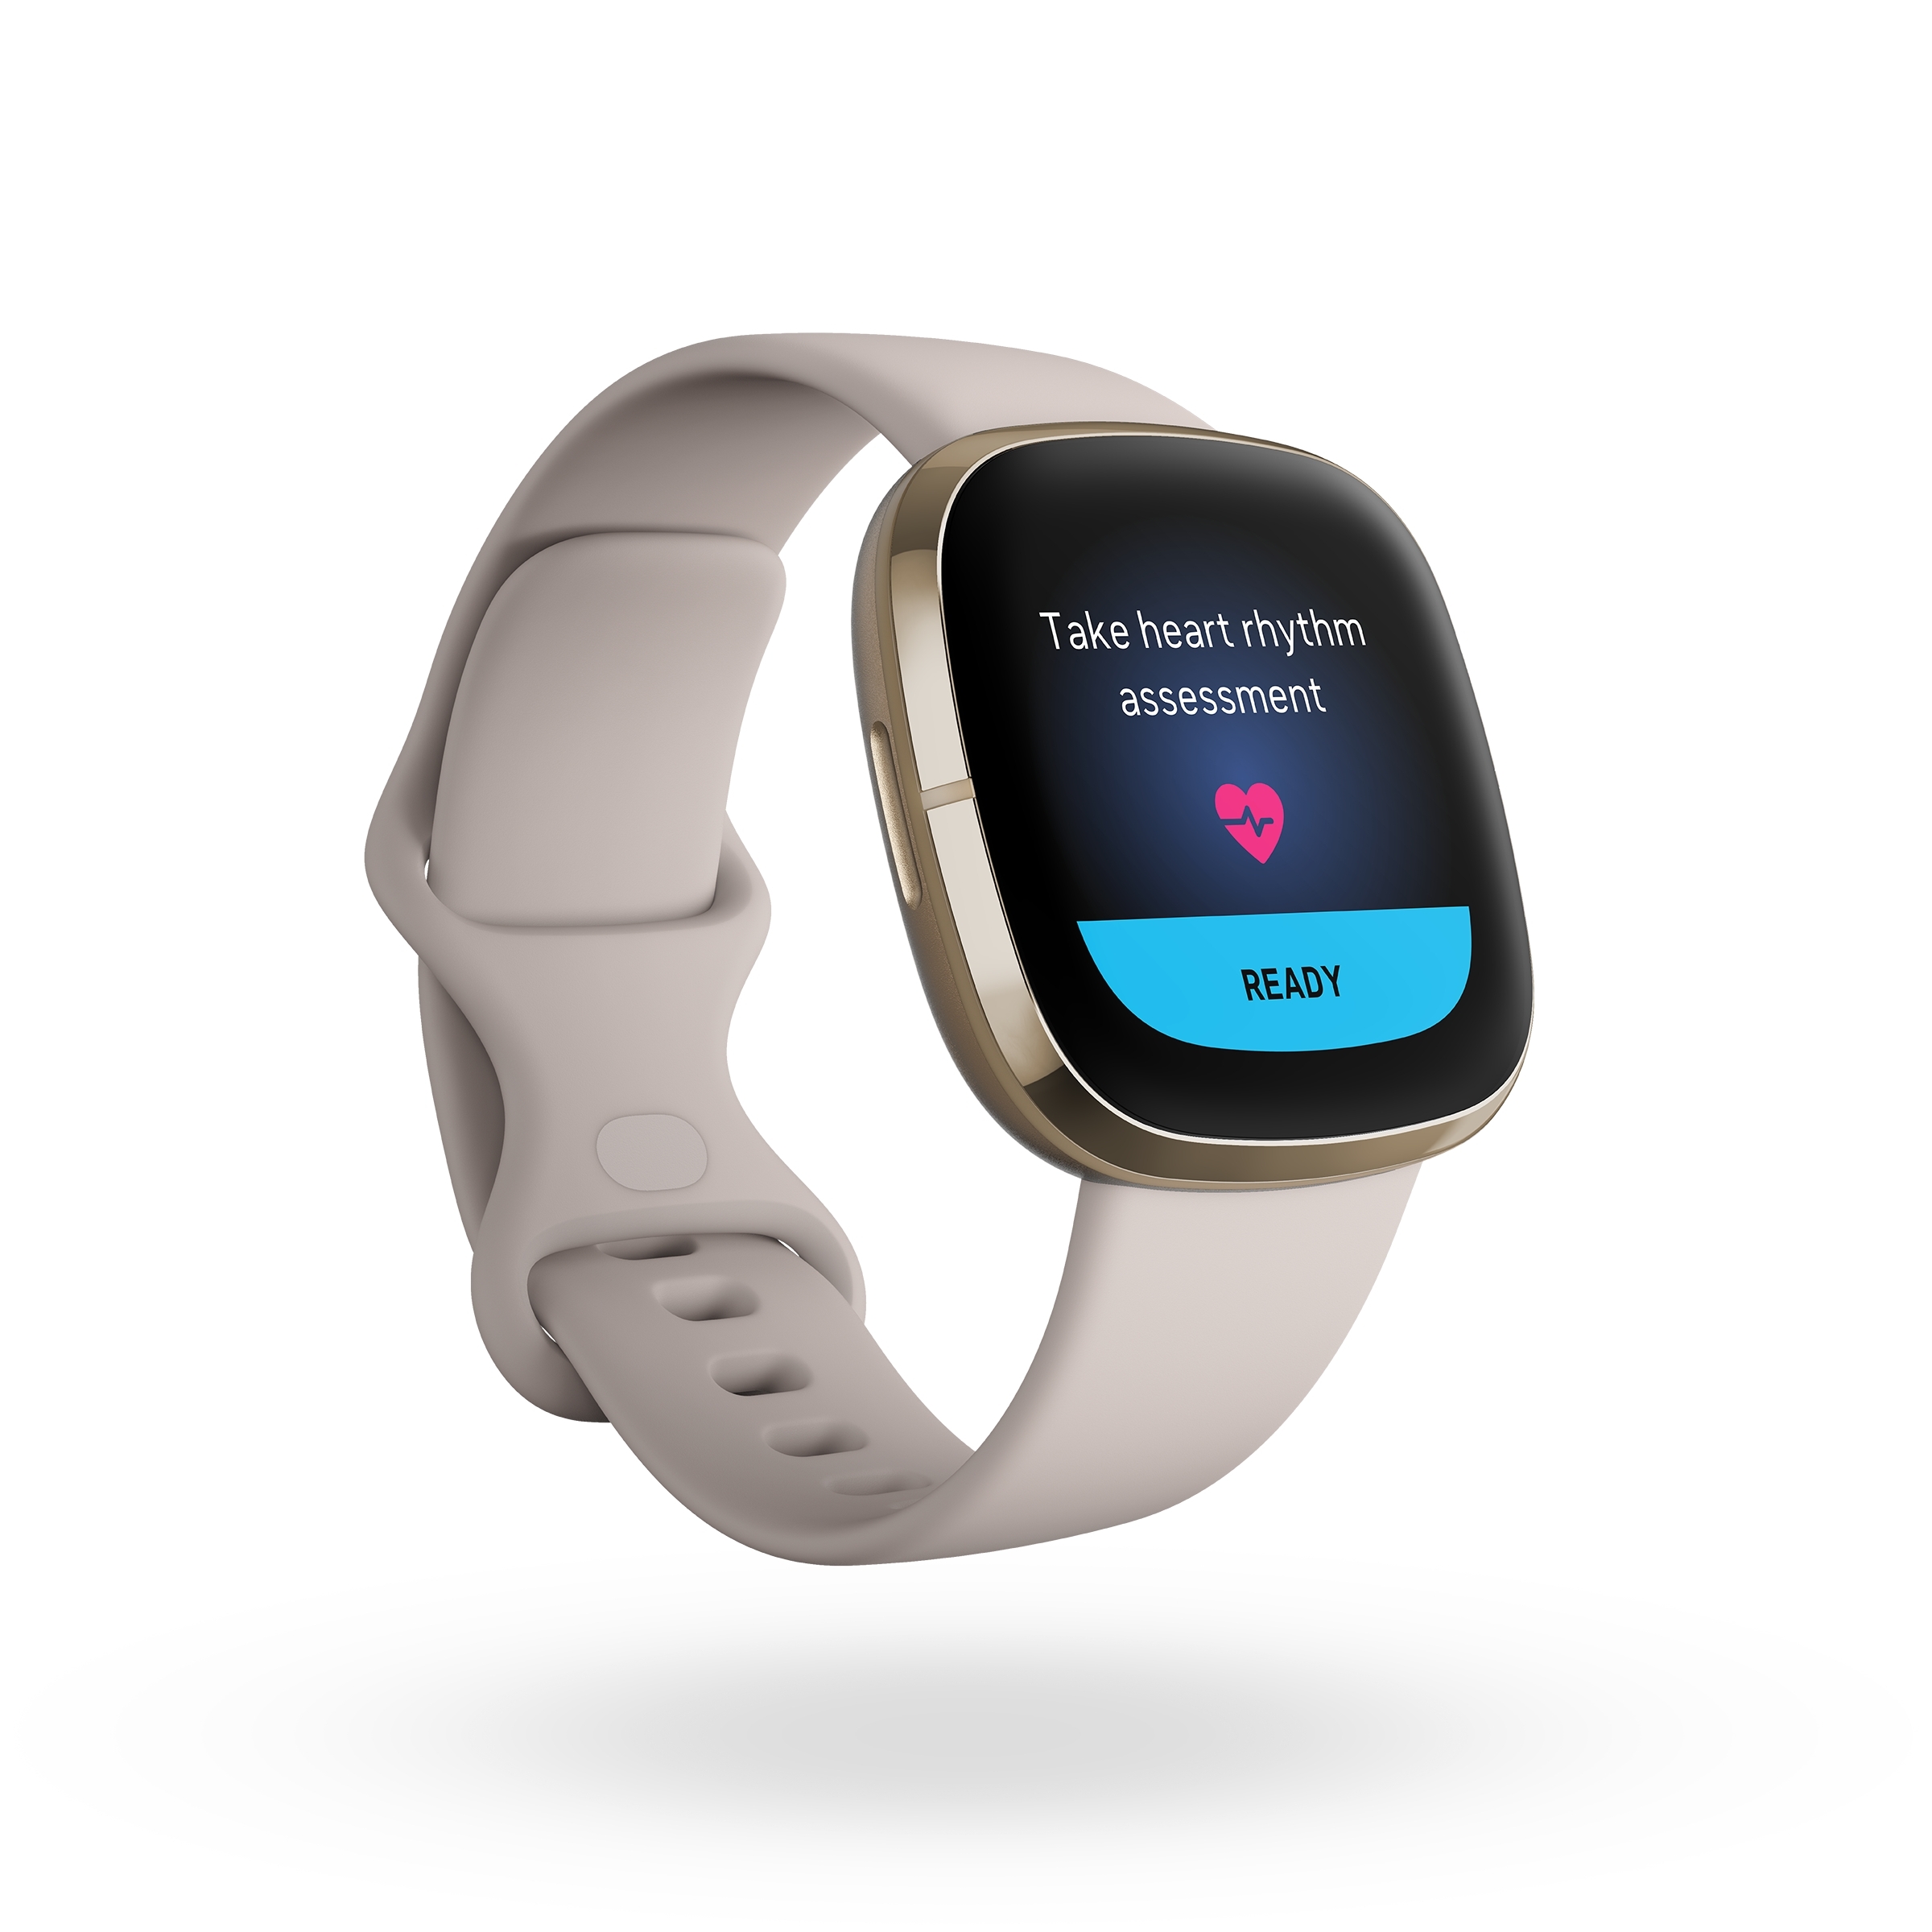 bue regnskyl alkove Fitbit Receives Regulatory Clearance in Both the United States and Europe  for ECG App to Identify Atrial Fibrillation (AFib) | Business Wire